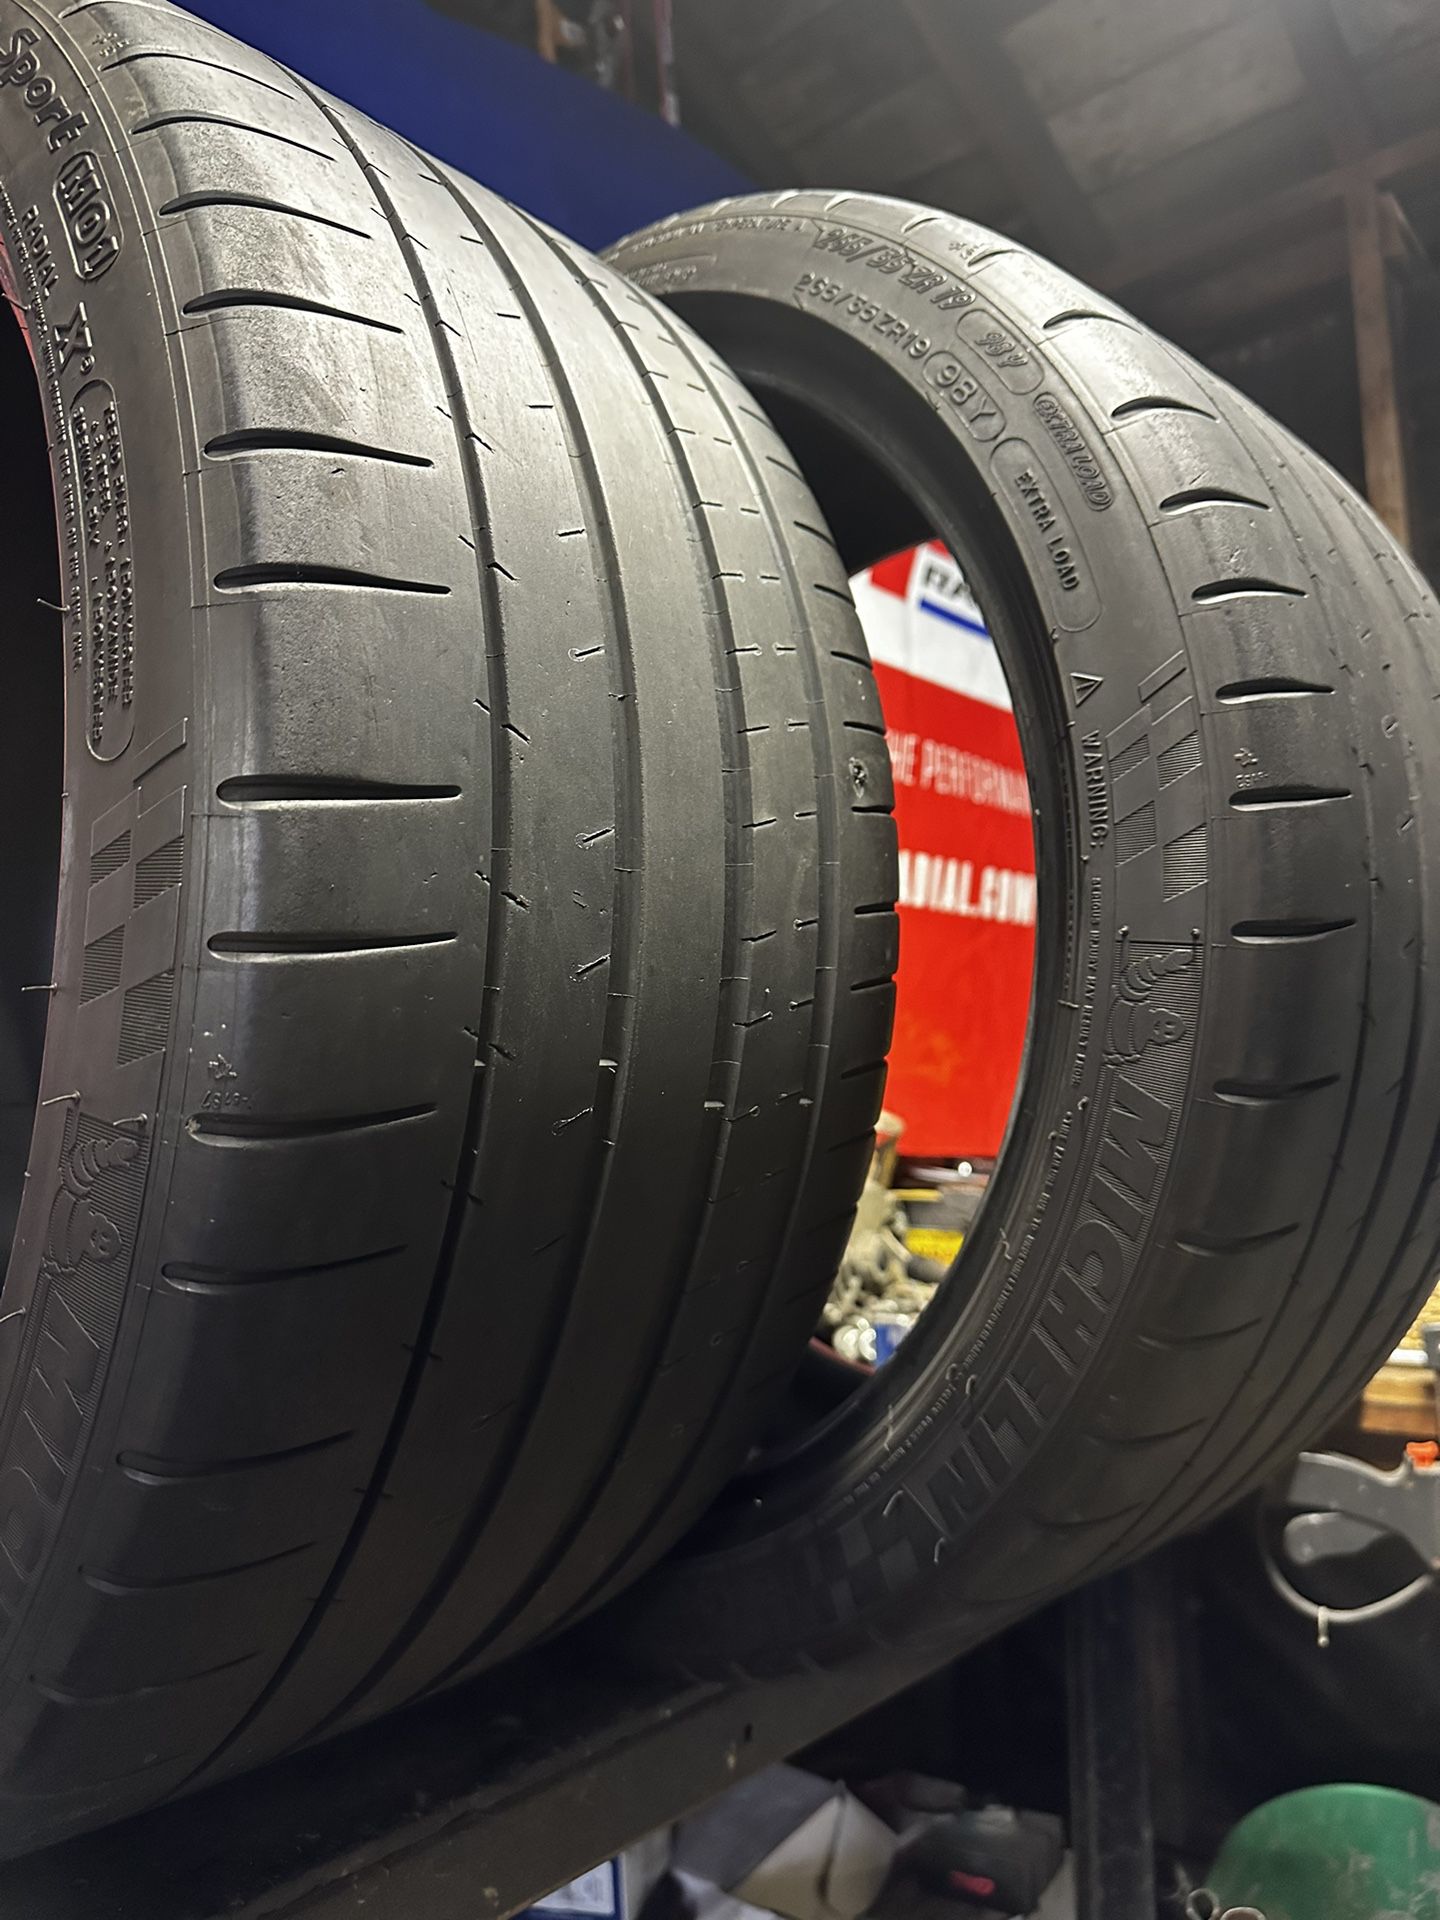 Michelin Tires 265/35R 19 Great Condition Two Tires For $100